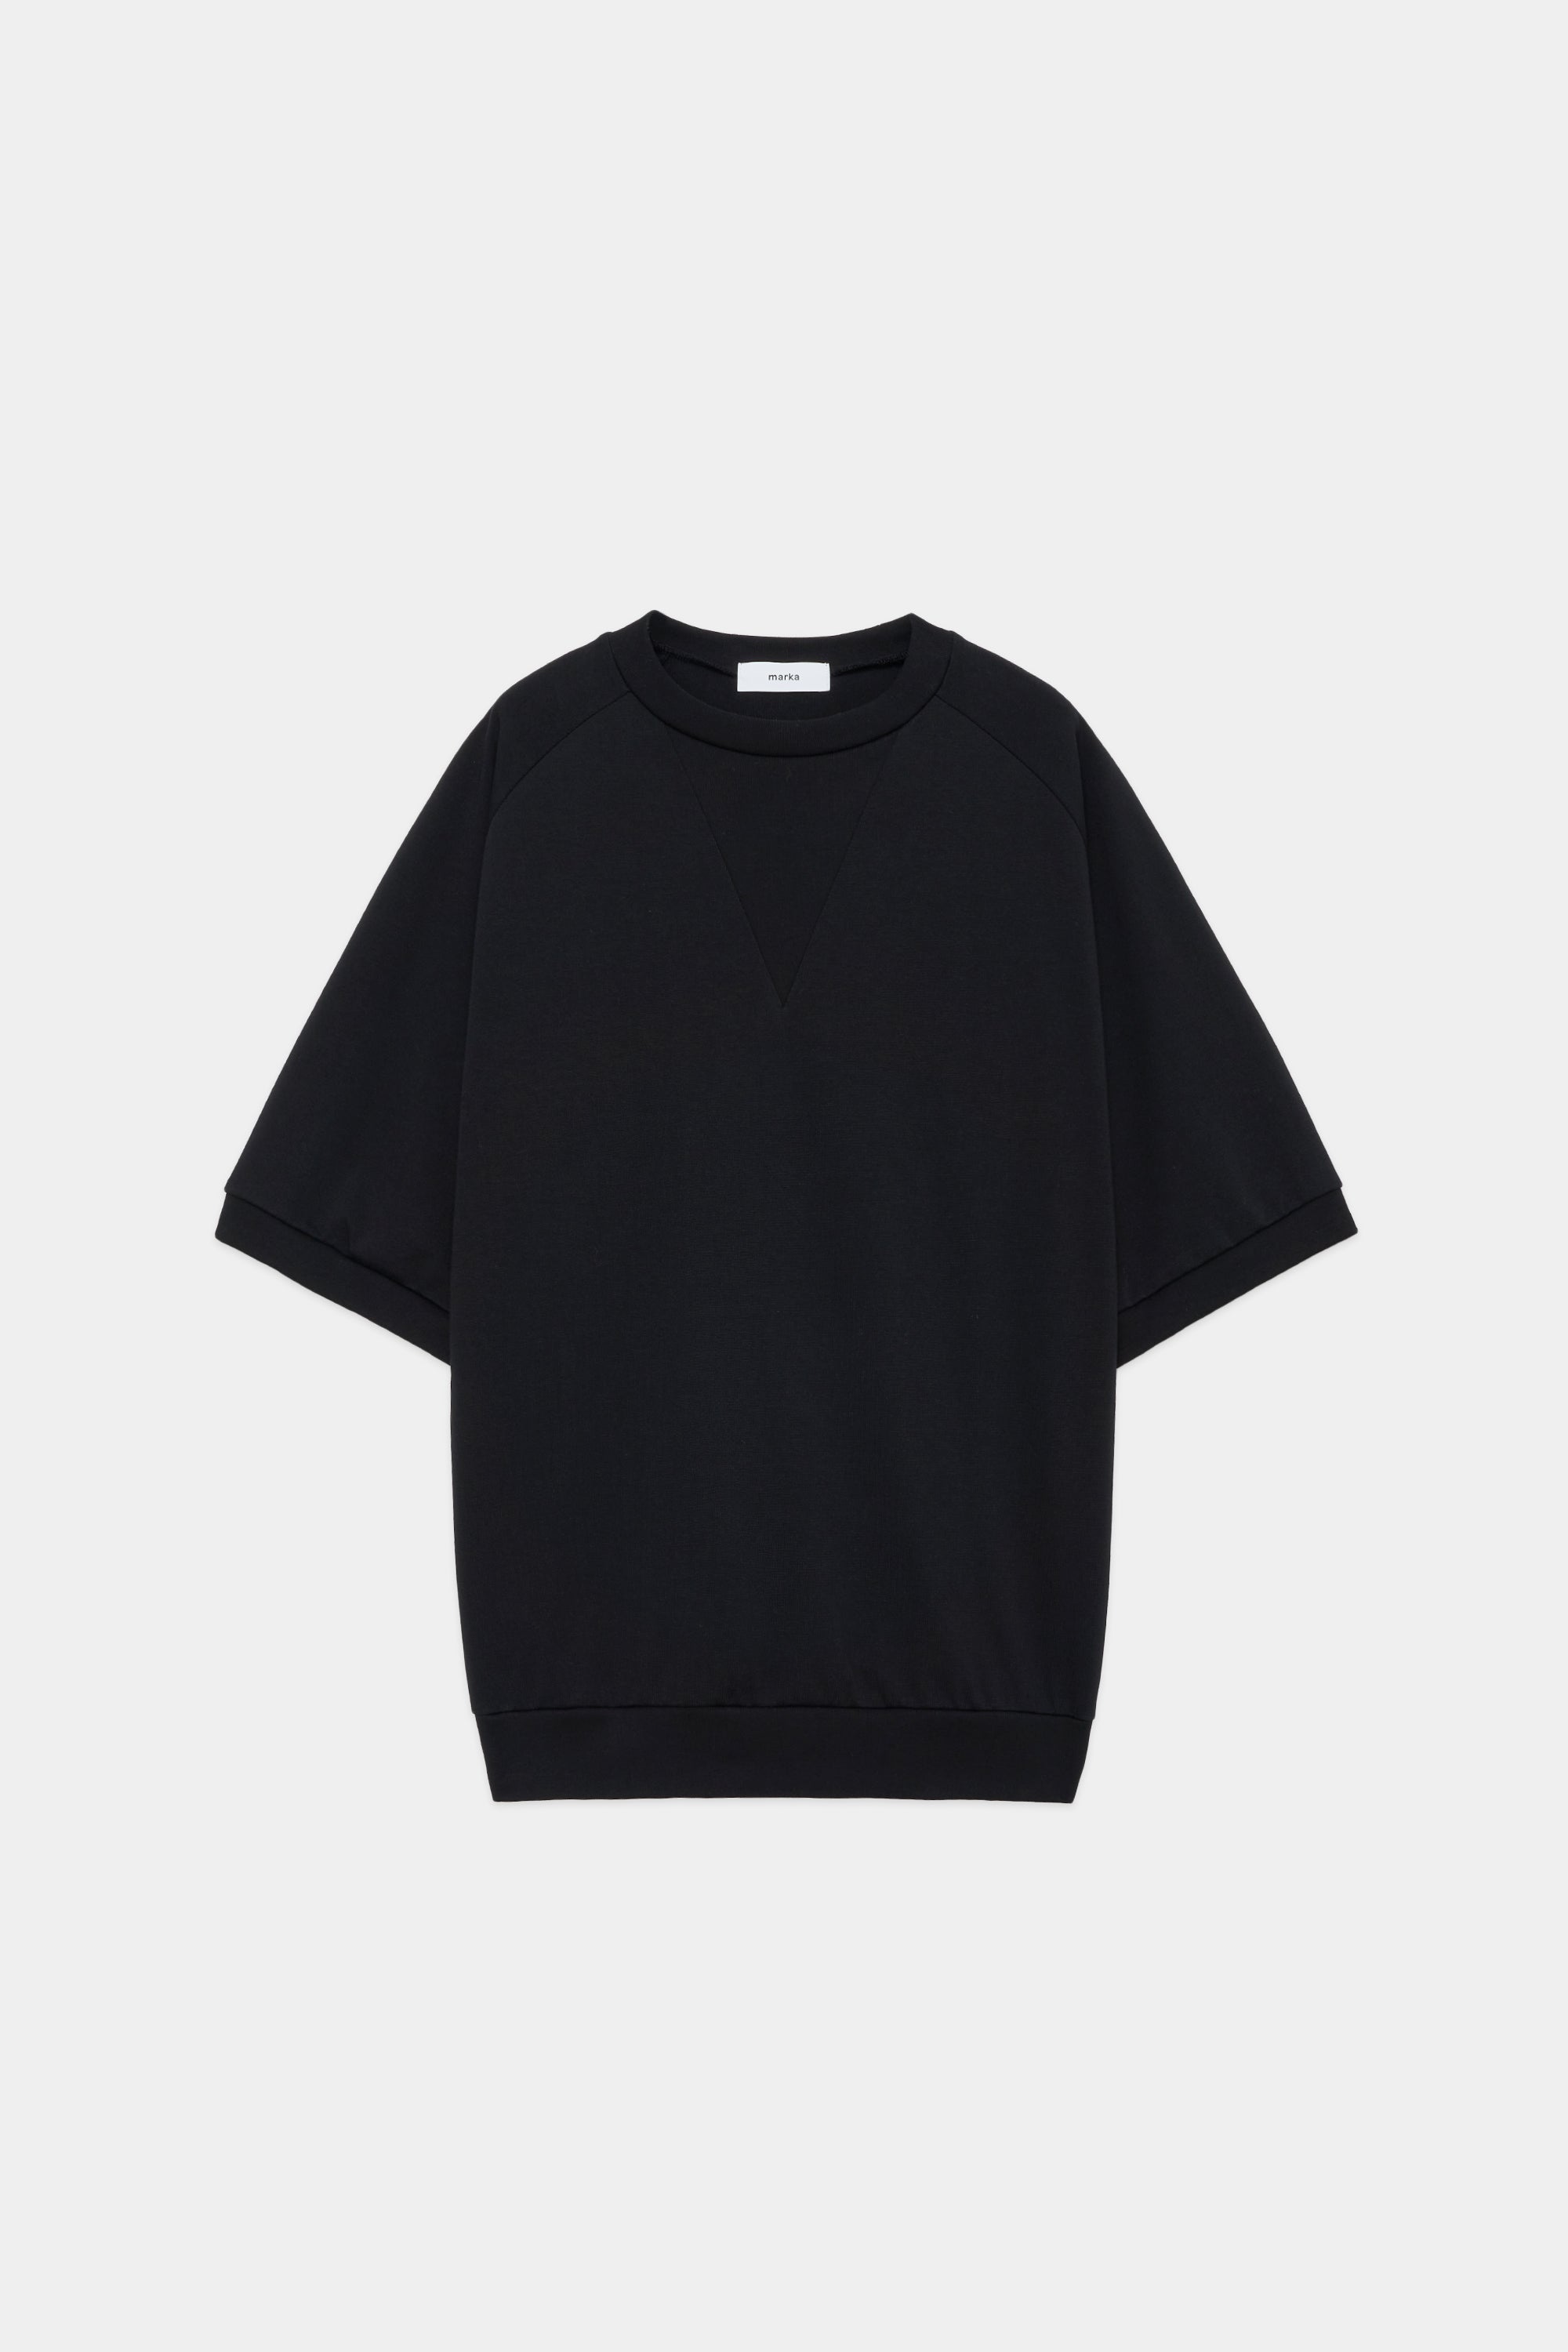 20//1 RECYCLE SUVIN ORGANIC COTTON KNIT V GUSSET CREW NECK, Black